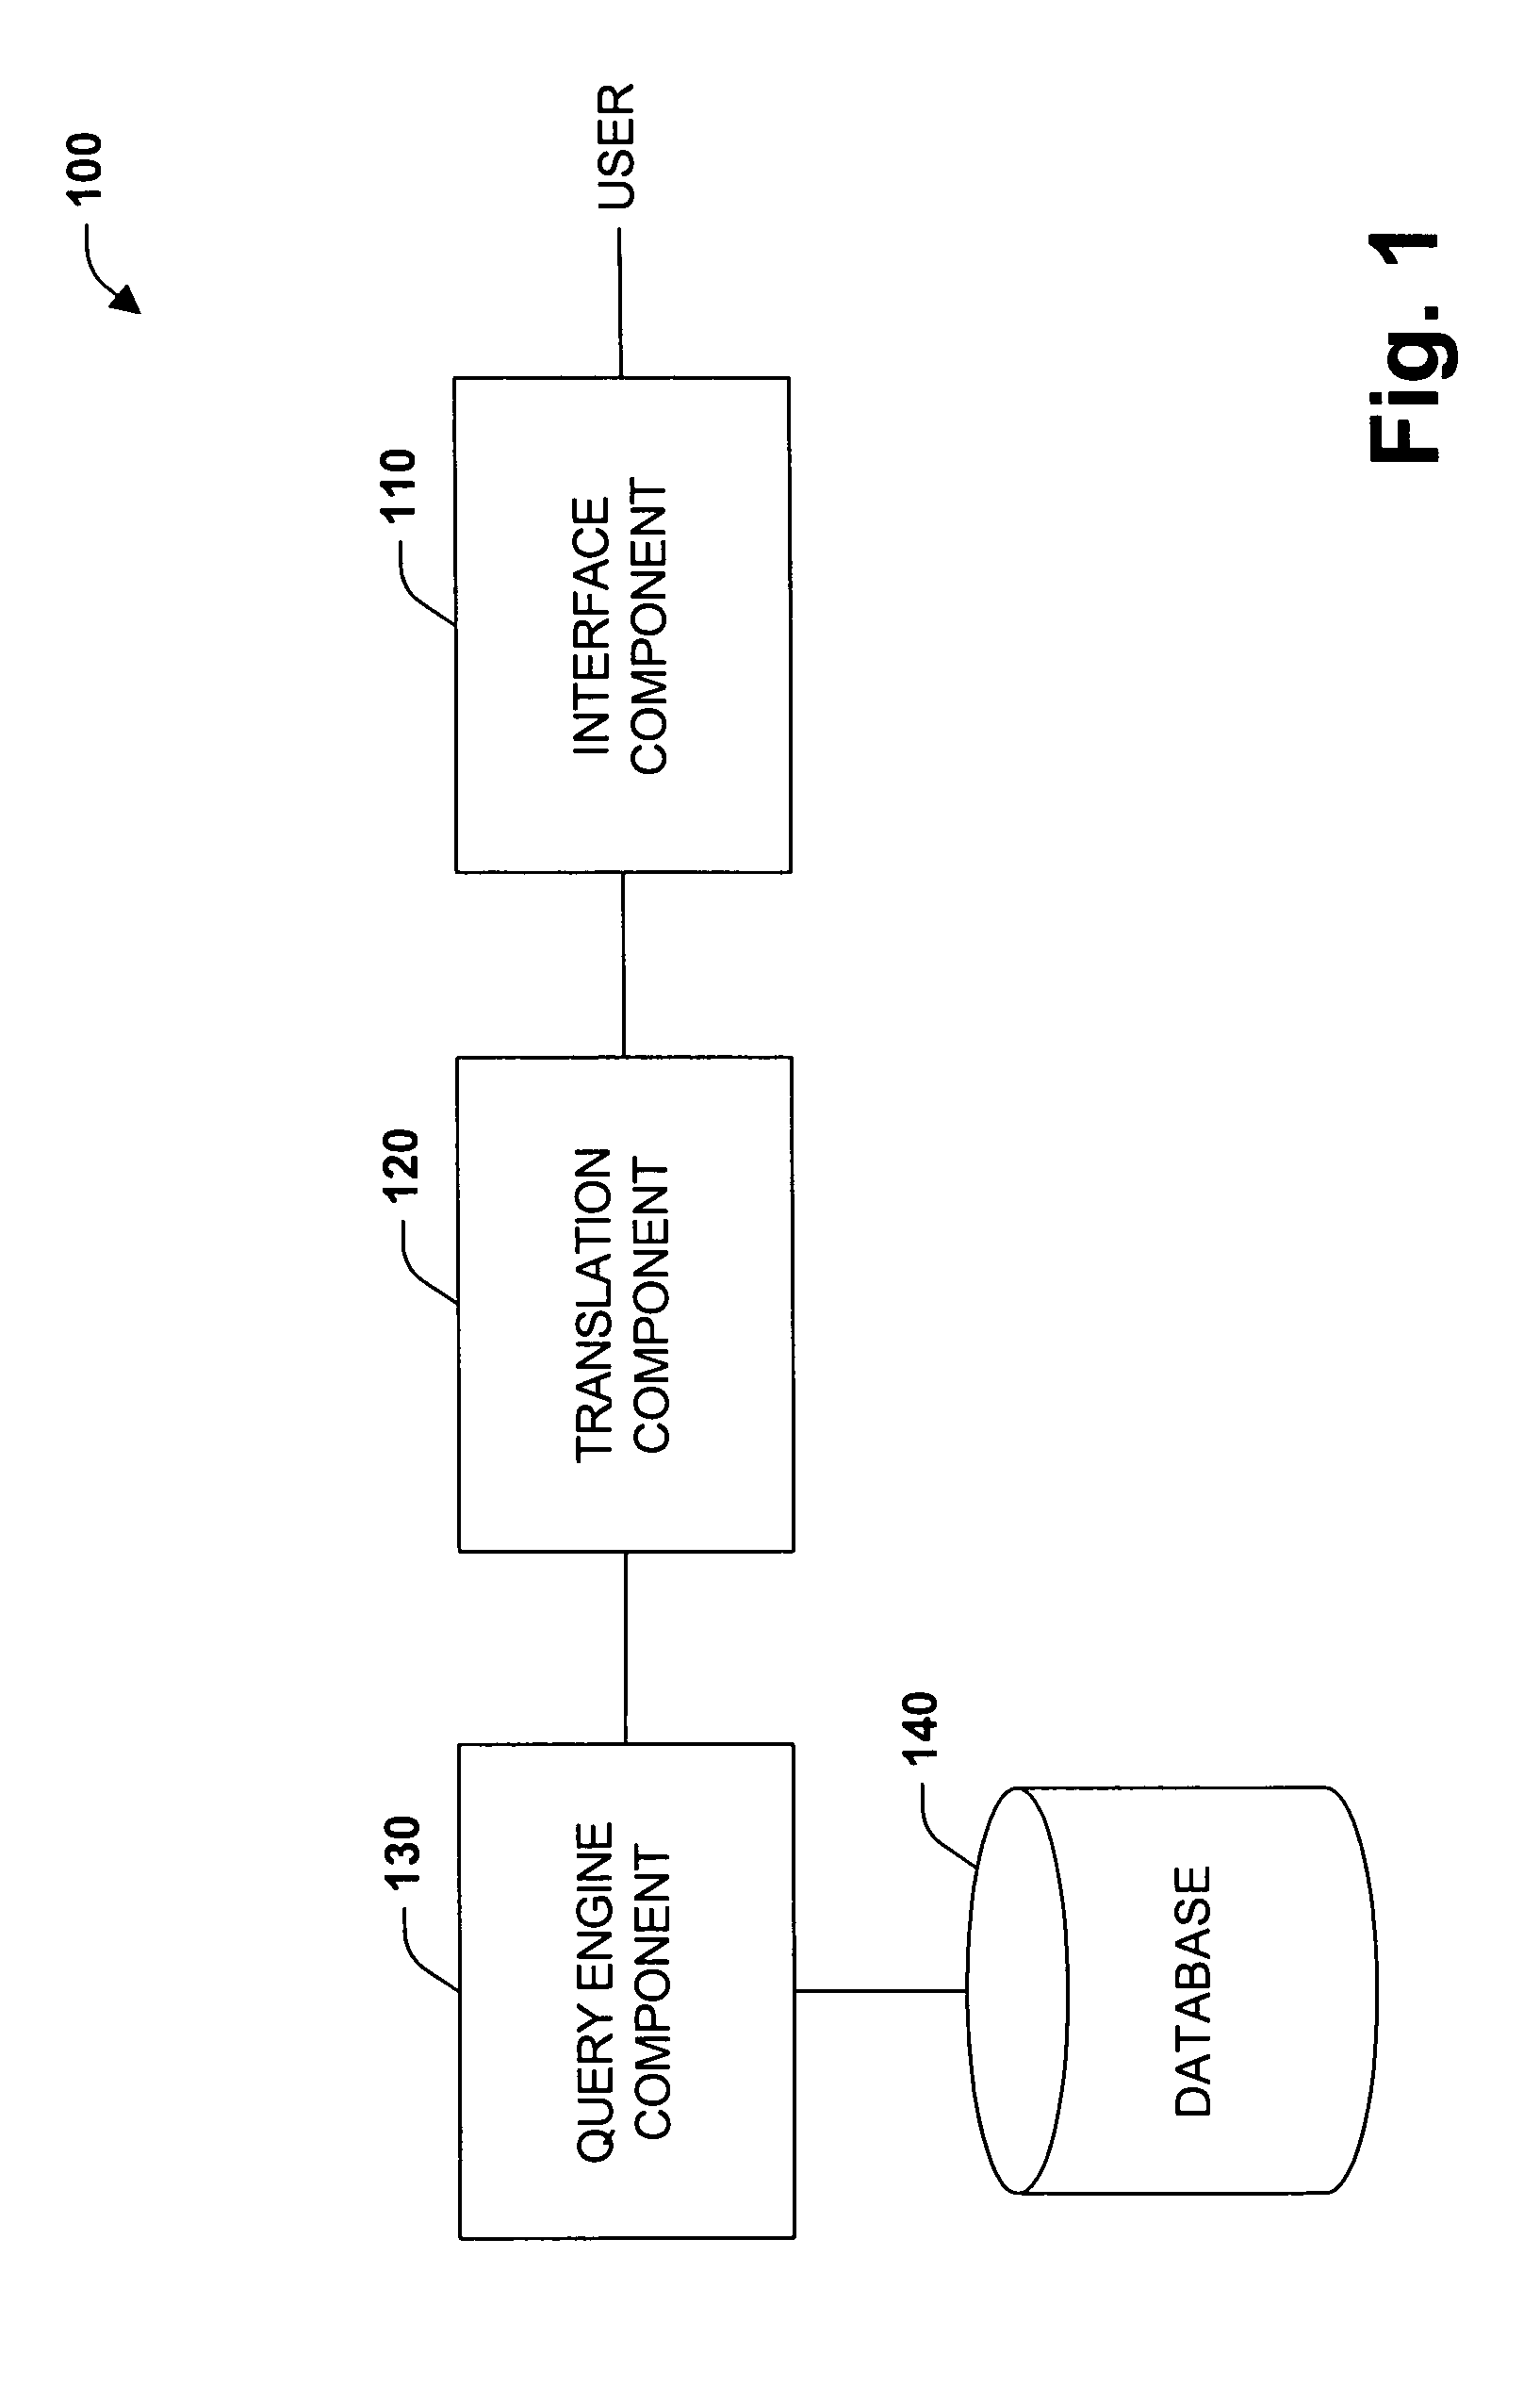 Multilingual database interaction system and method